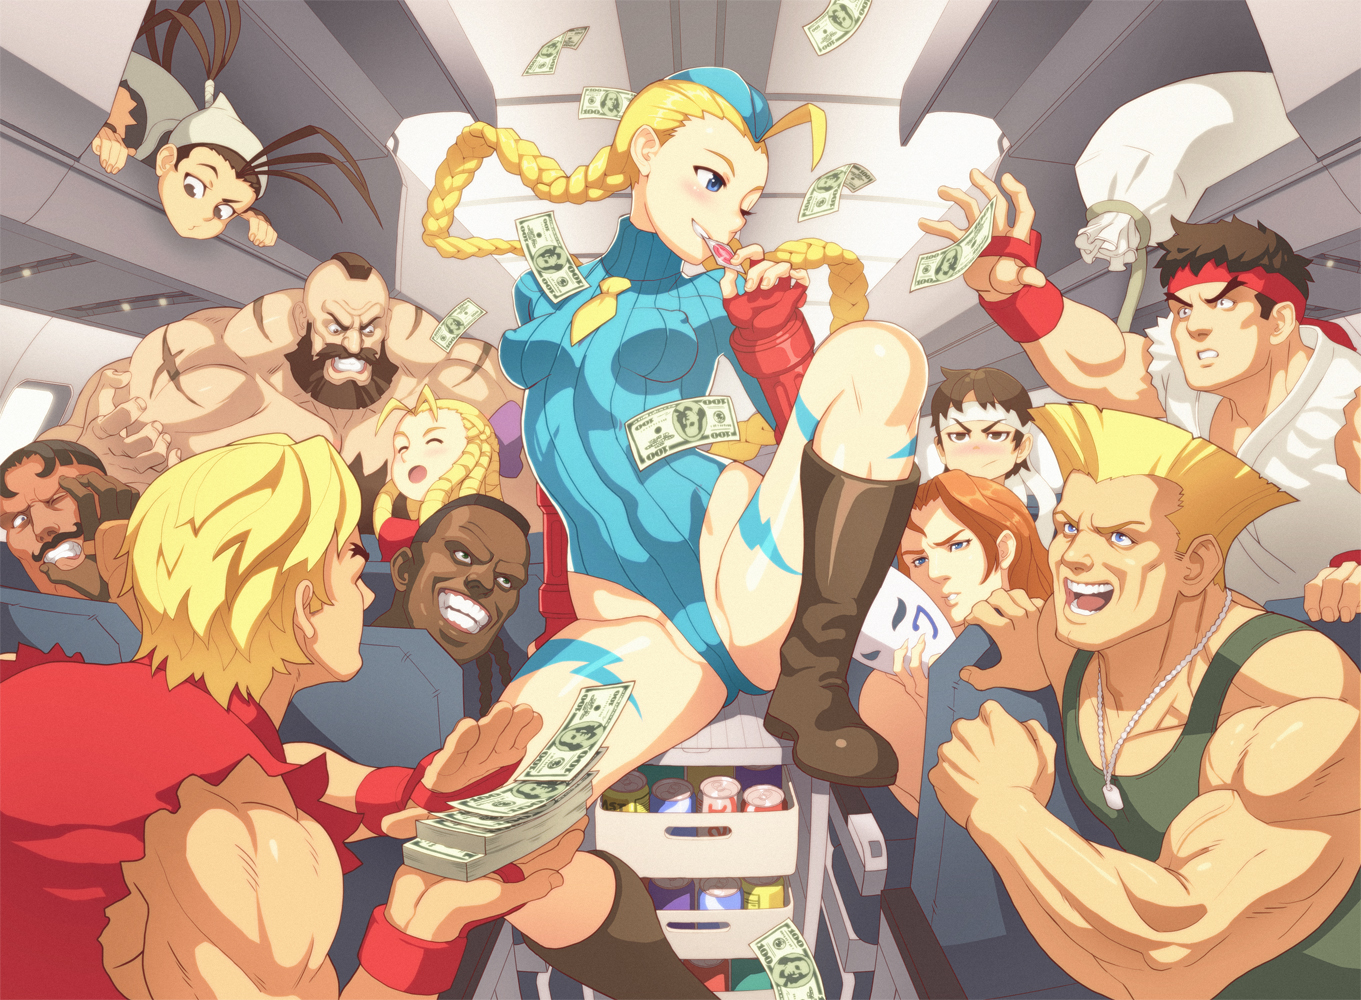 Anime 1361x1000 Street Fighter Ryu (Street Fighter) Ken (Street Fighter) Vega (Street Fighter) Zangief(street fighter) condom Cammy White Ibuki (Street Fighter) spread legs money blushing nipples through clothing group of people video games blonde boots Guile (character) sakura (street fighter) video game art video game man video game girls women men Laura (Street Fighter)